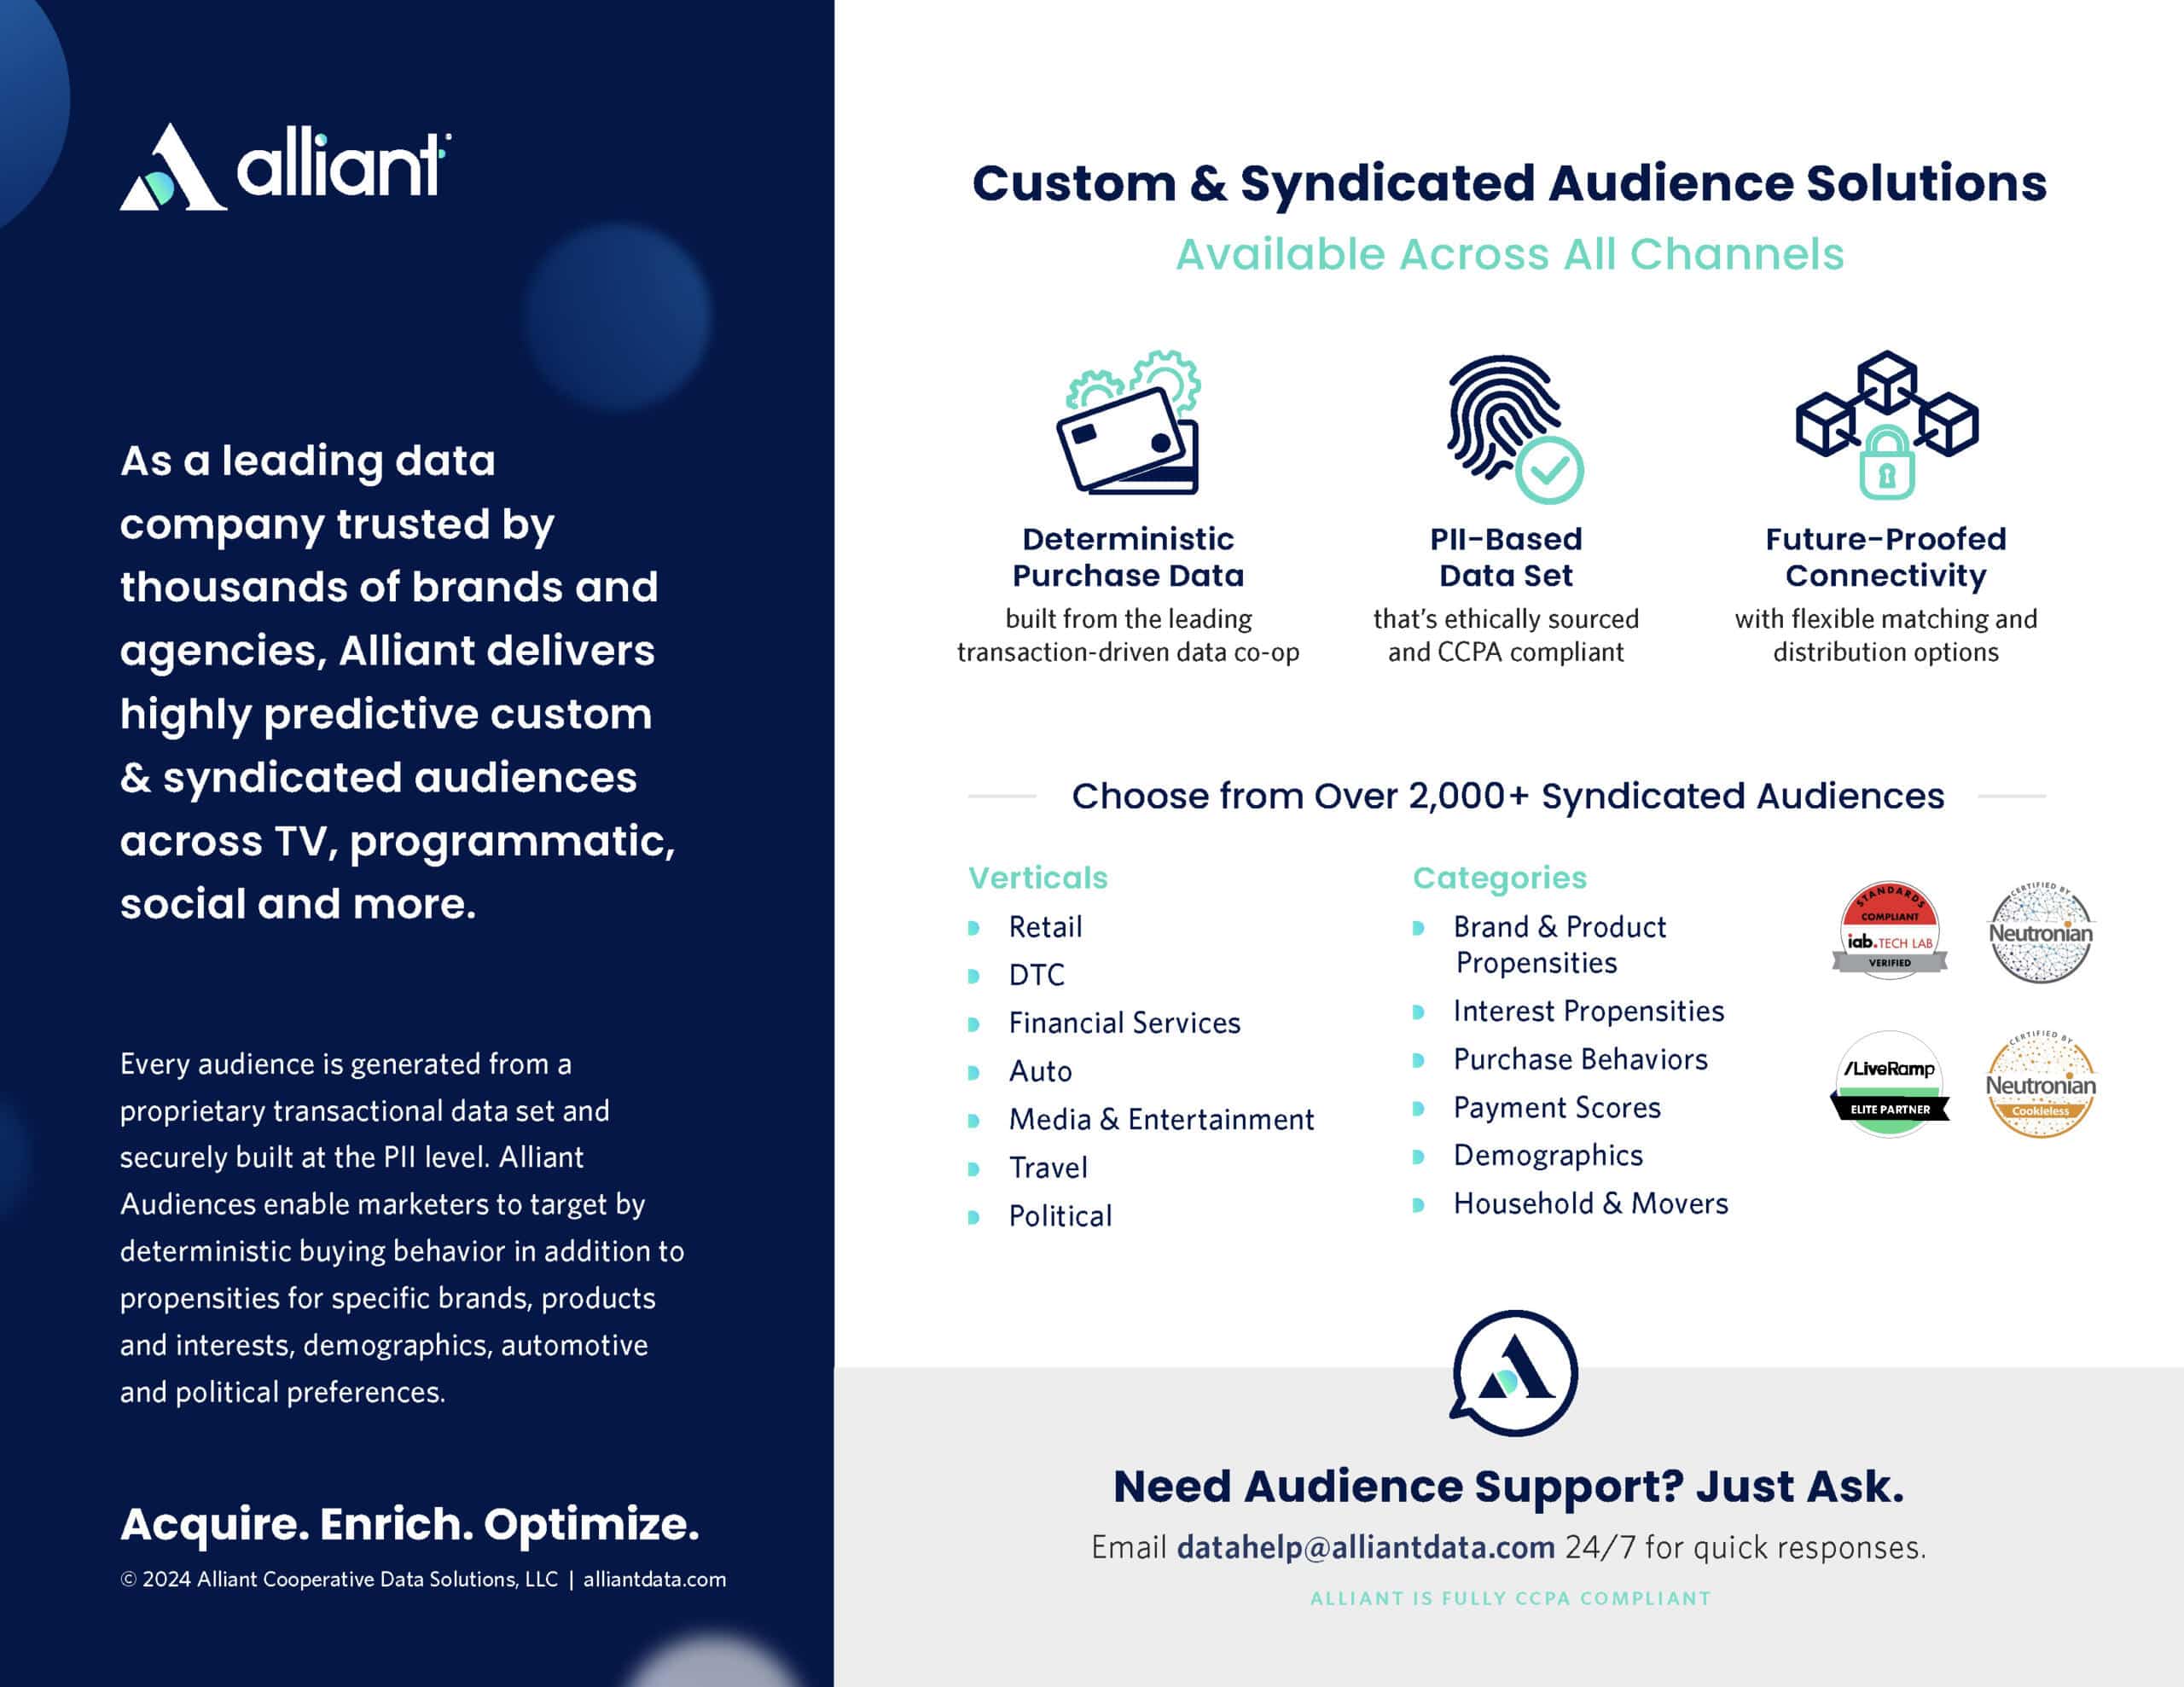 Infographic featuring Alliant's custom & syndicated audience solutions.